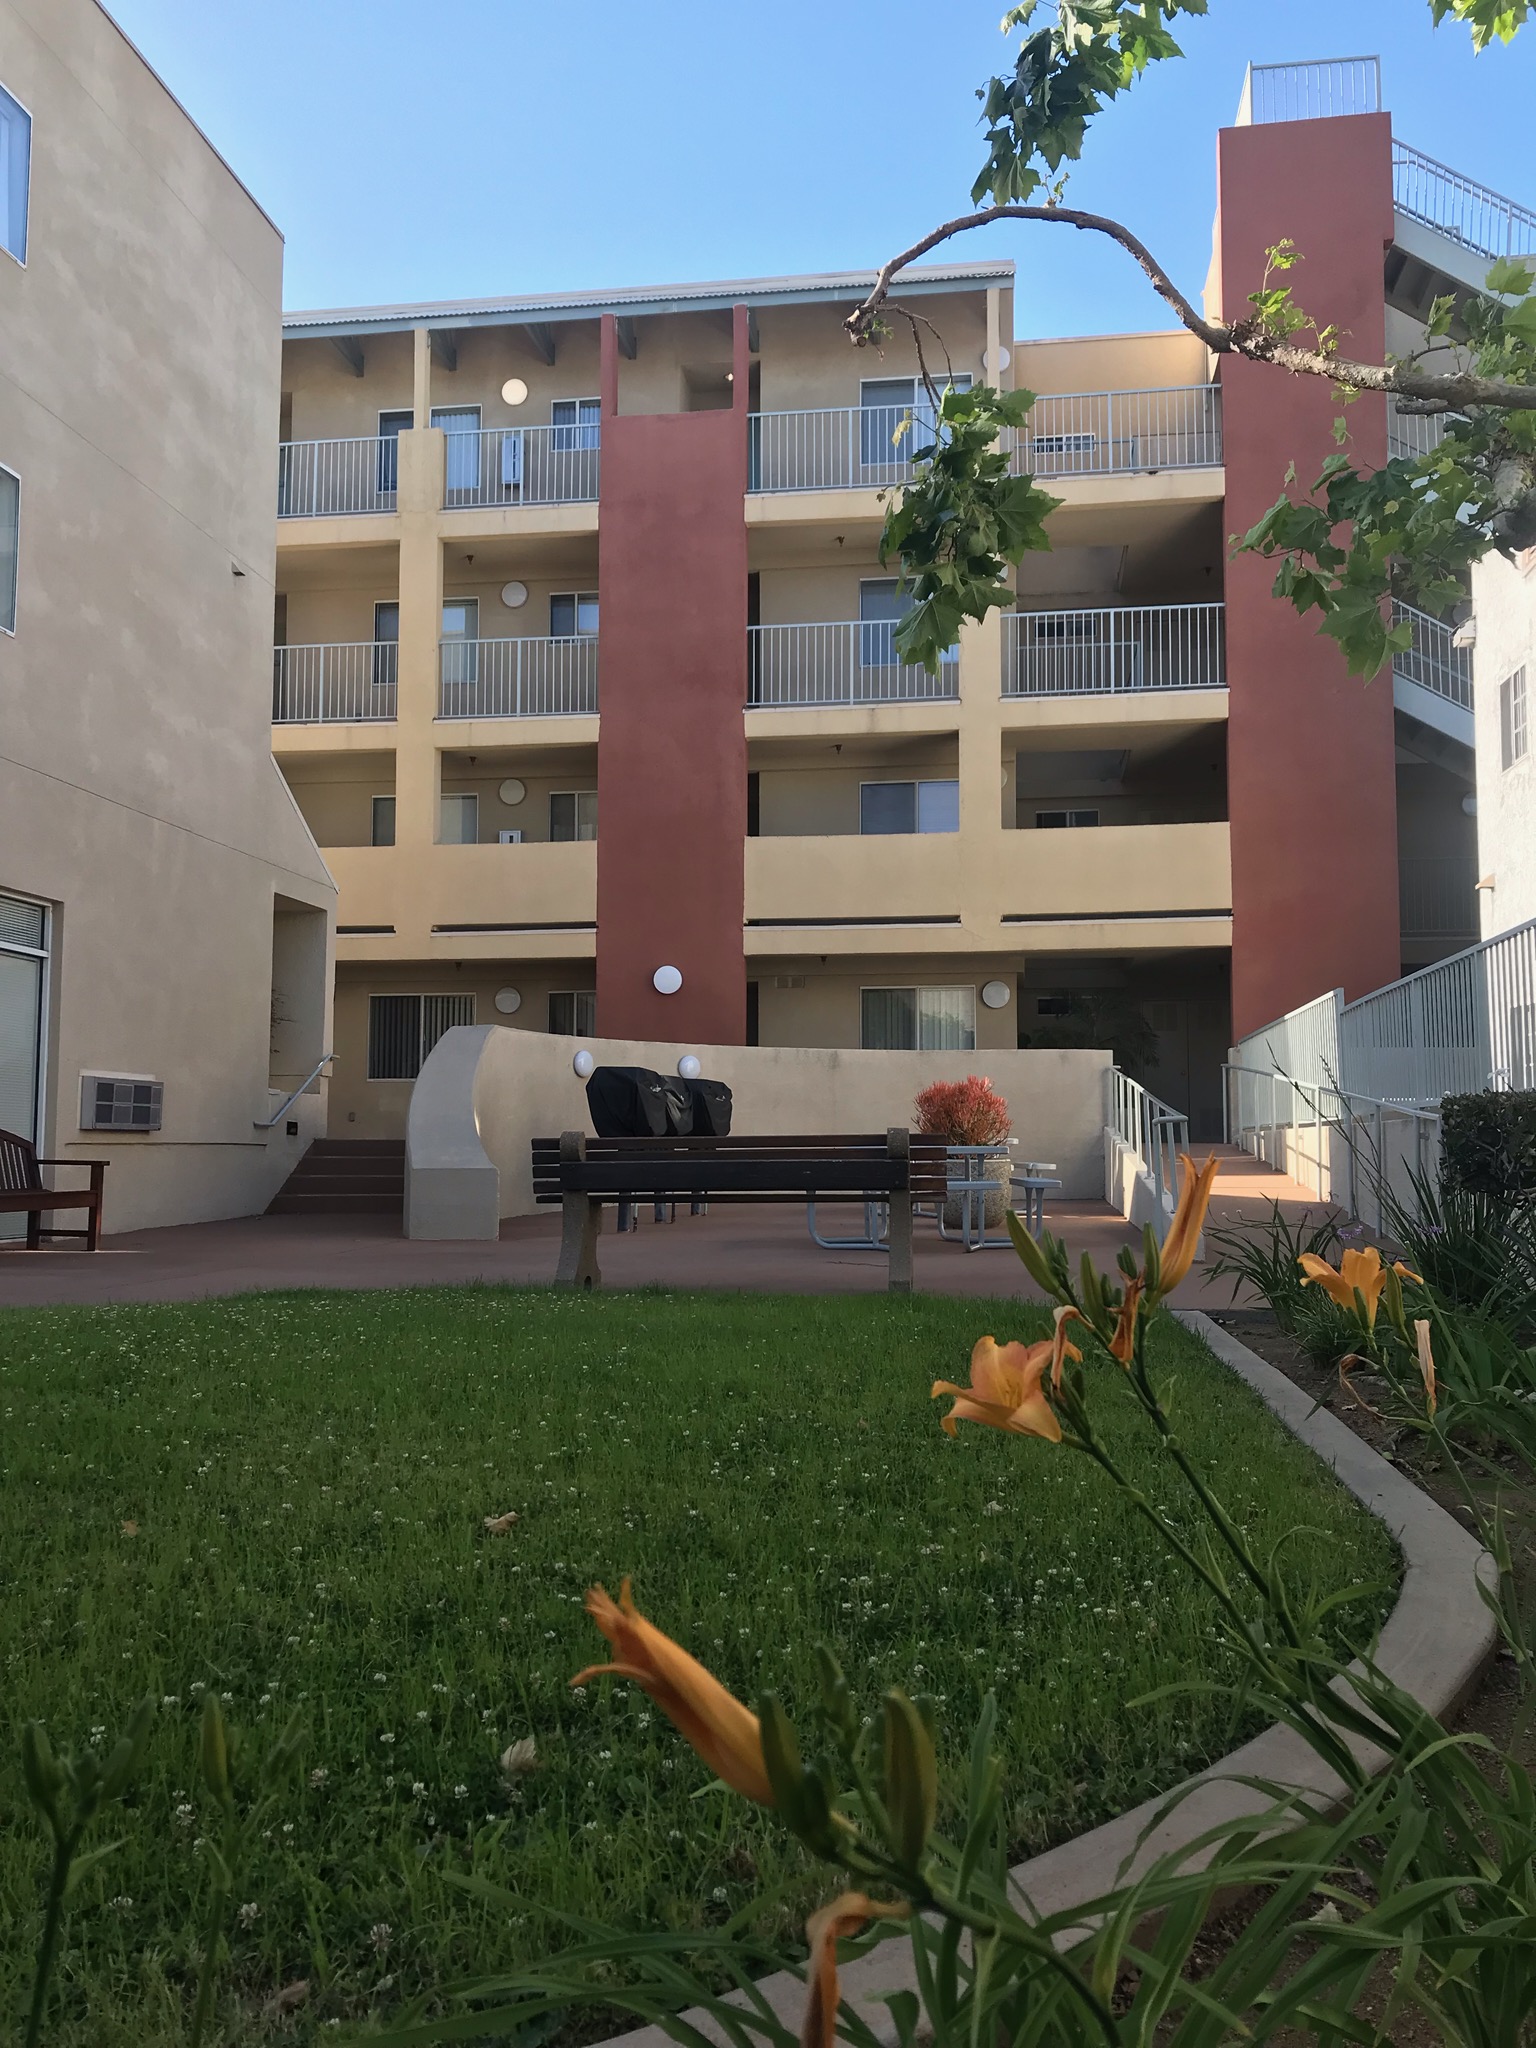 Four story building with an outside community lounge area.
Steps and accessibility ramp that leads down to bbq area 
with bench seating and patio table. Small grass Next to 
grass area is a flower bed along the fence